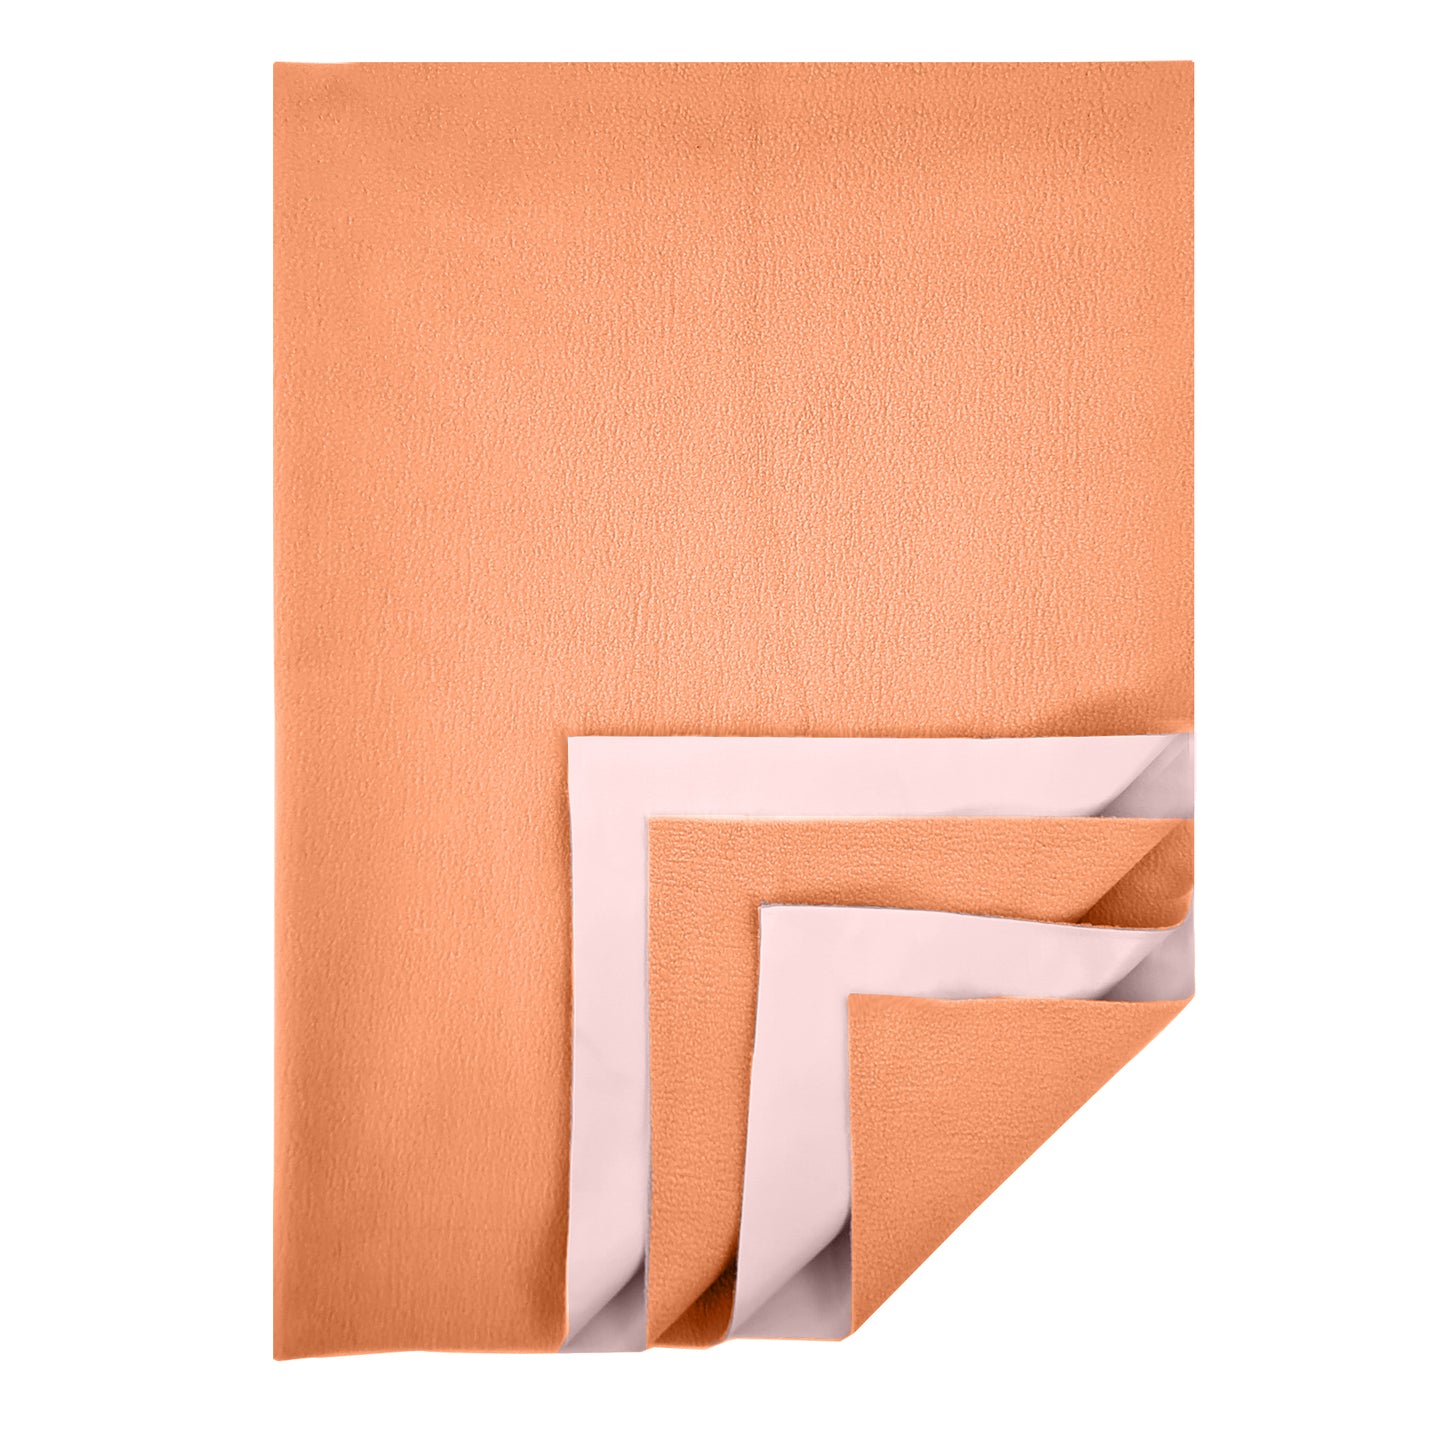 Waterproof Bed Protector, Extra Absorbent Quick Dry Sheet, Baby Bed Protector (70 X 50 CM), Pack of 2 -PEACH